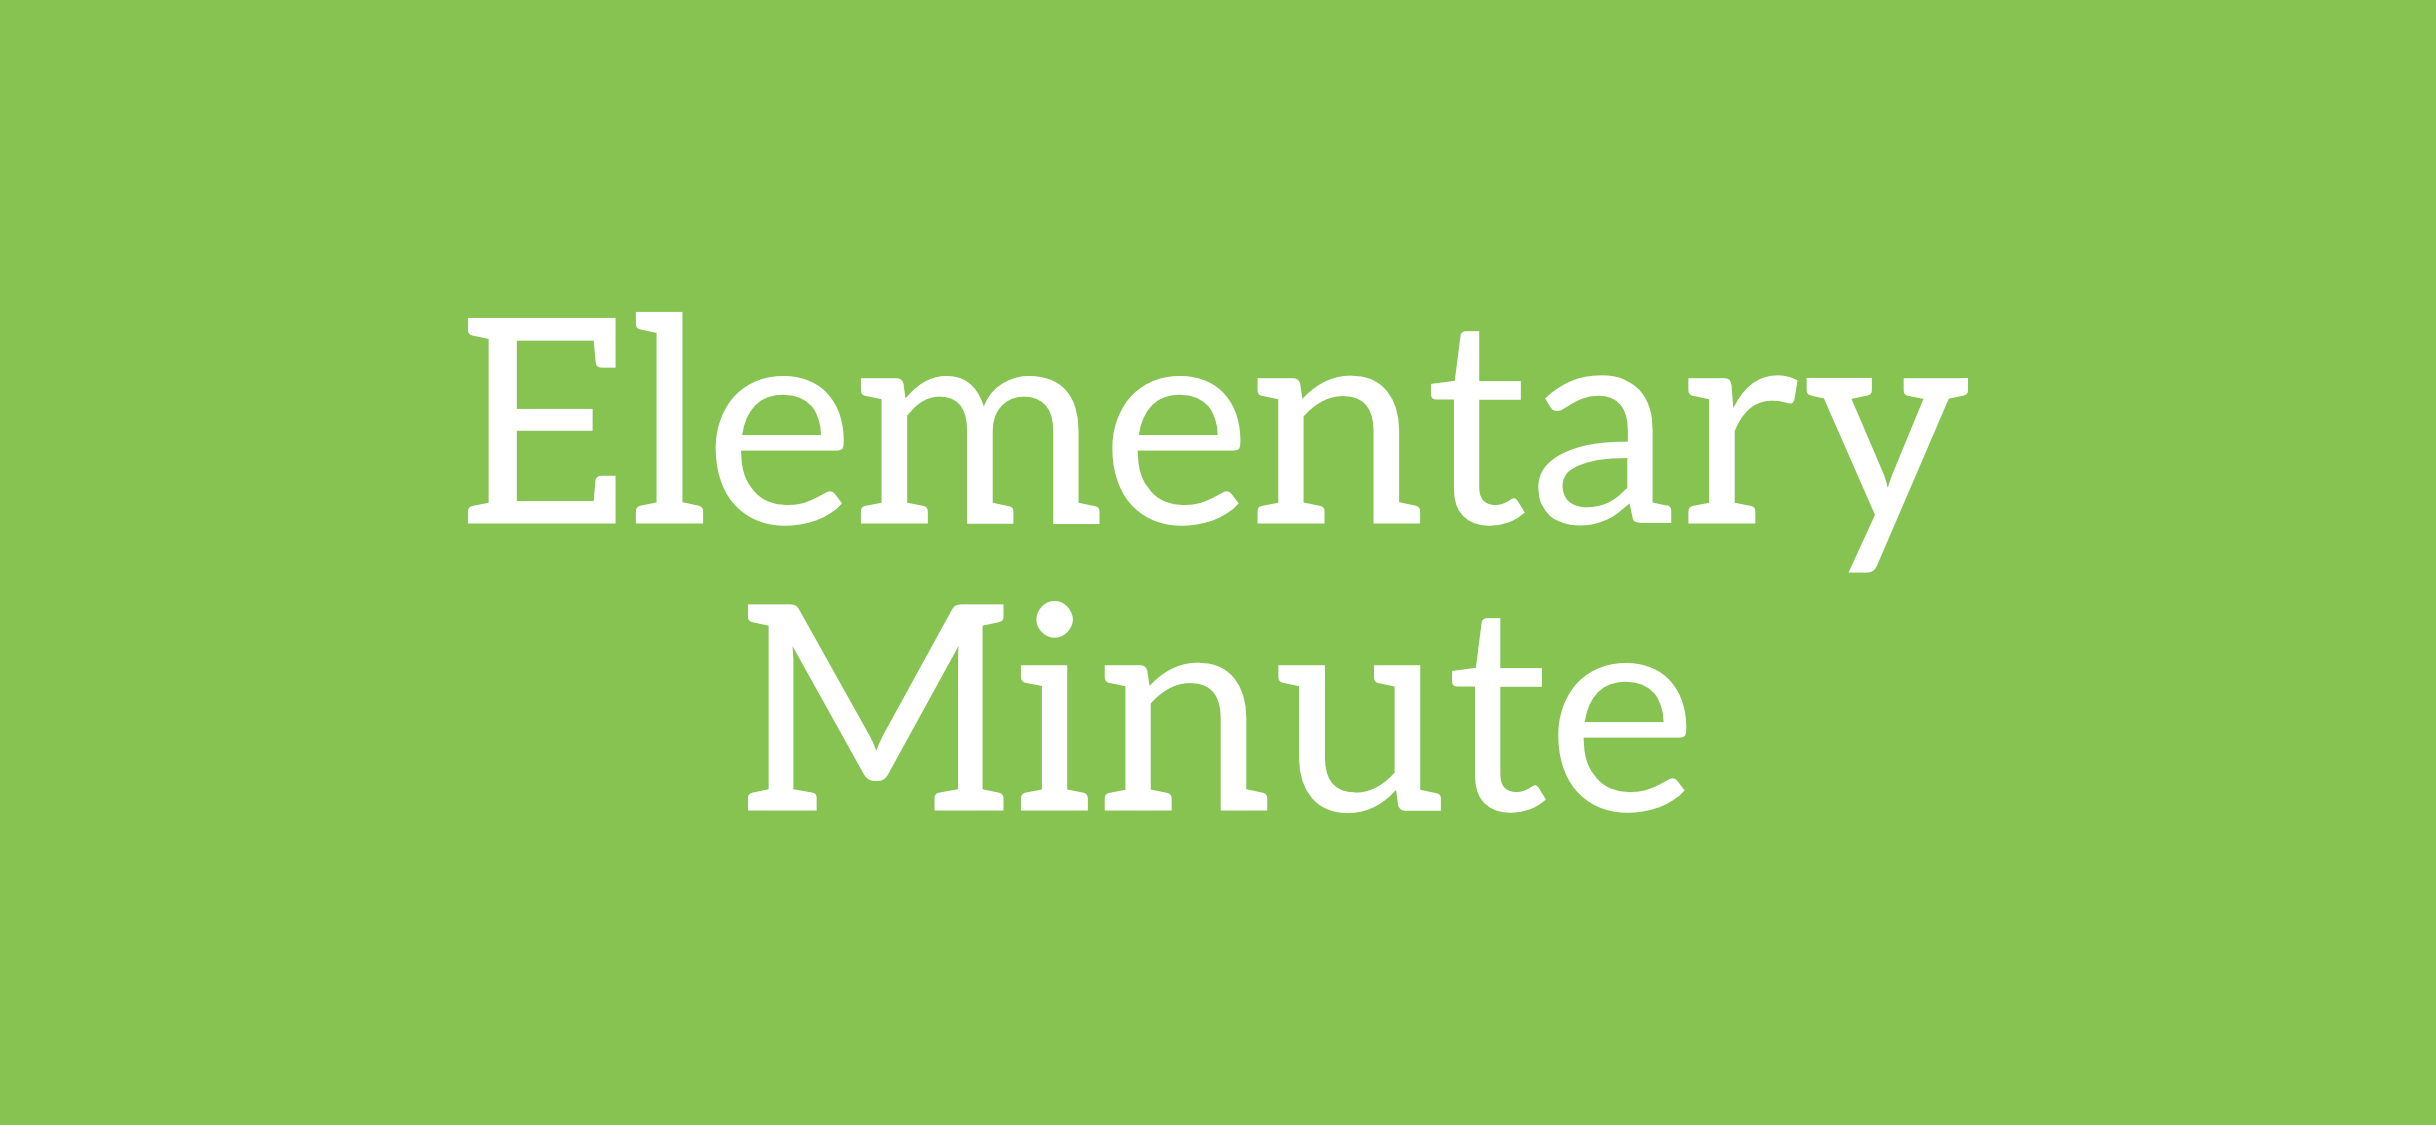 Elementary Minute